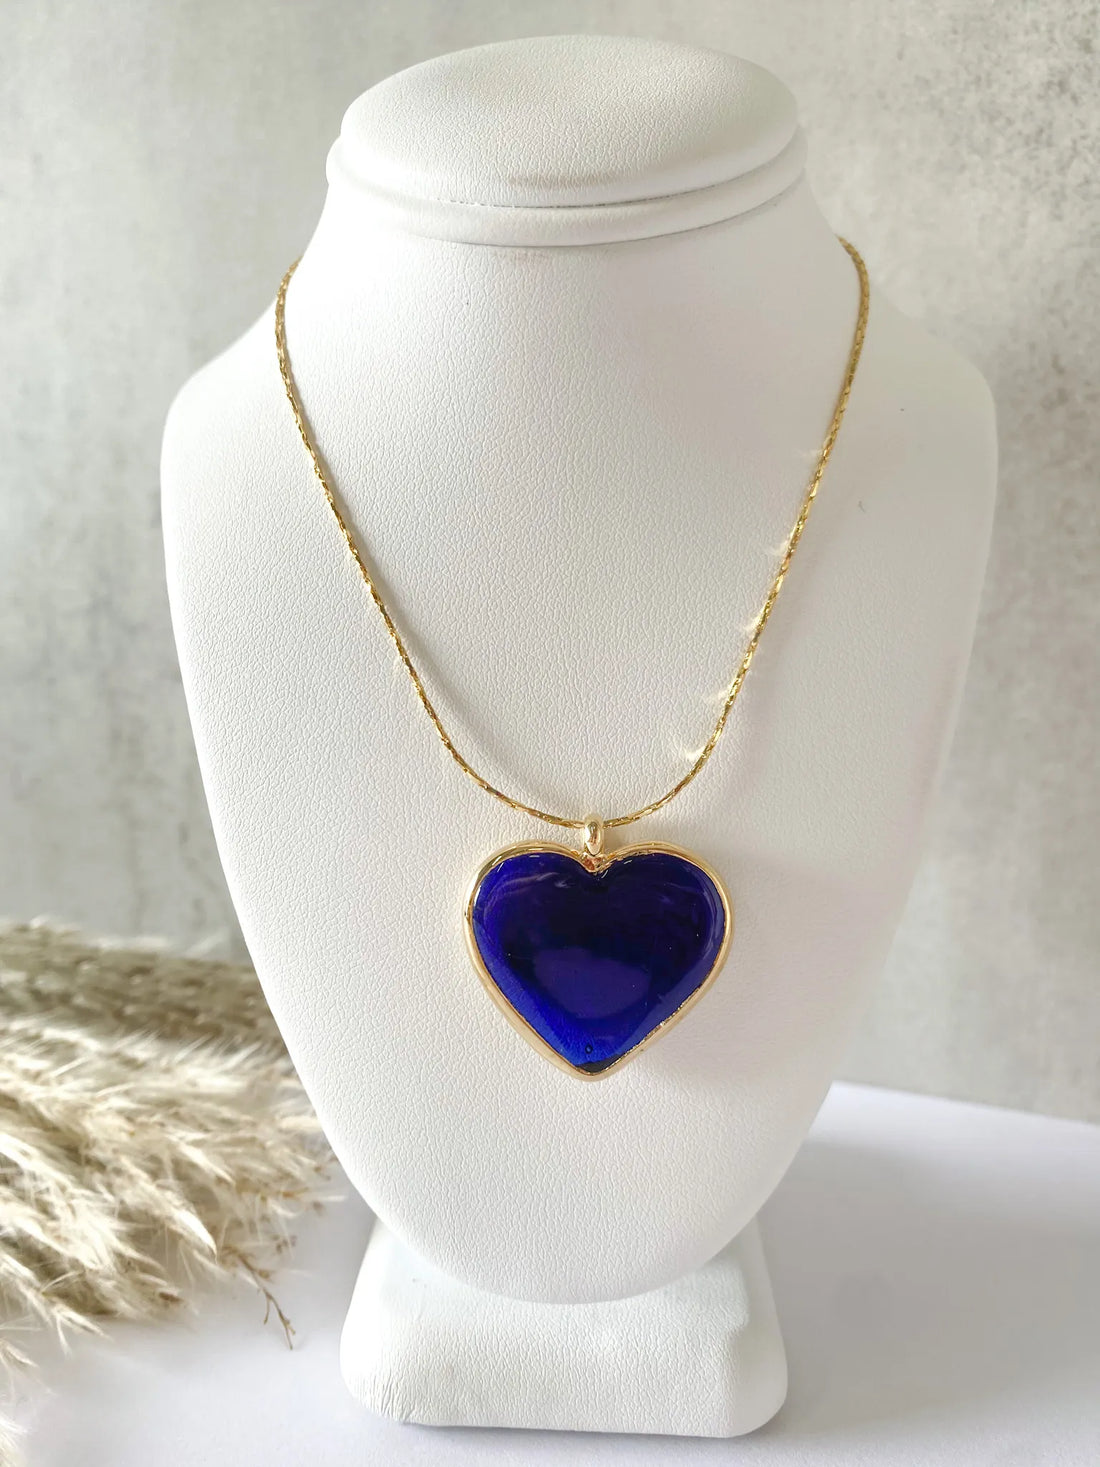 Blue Crystal Heart Necklace.